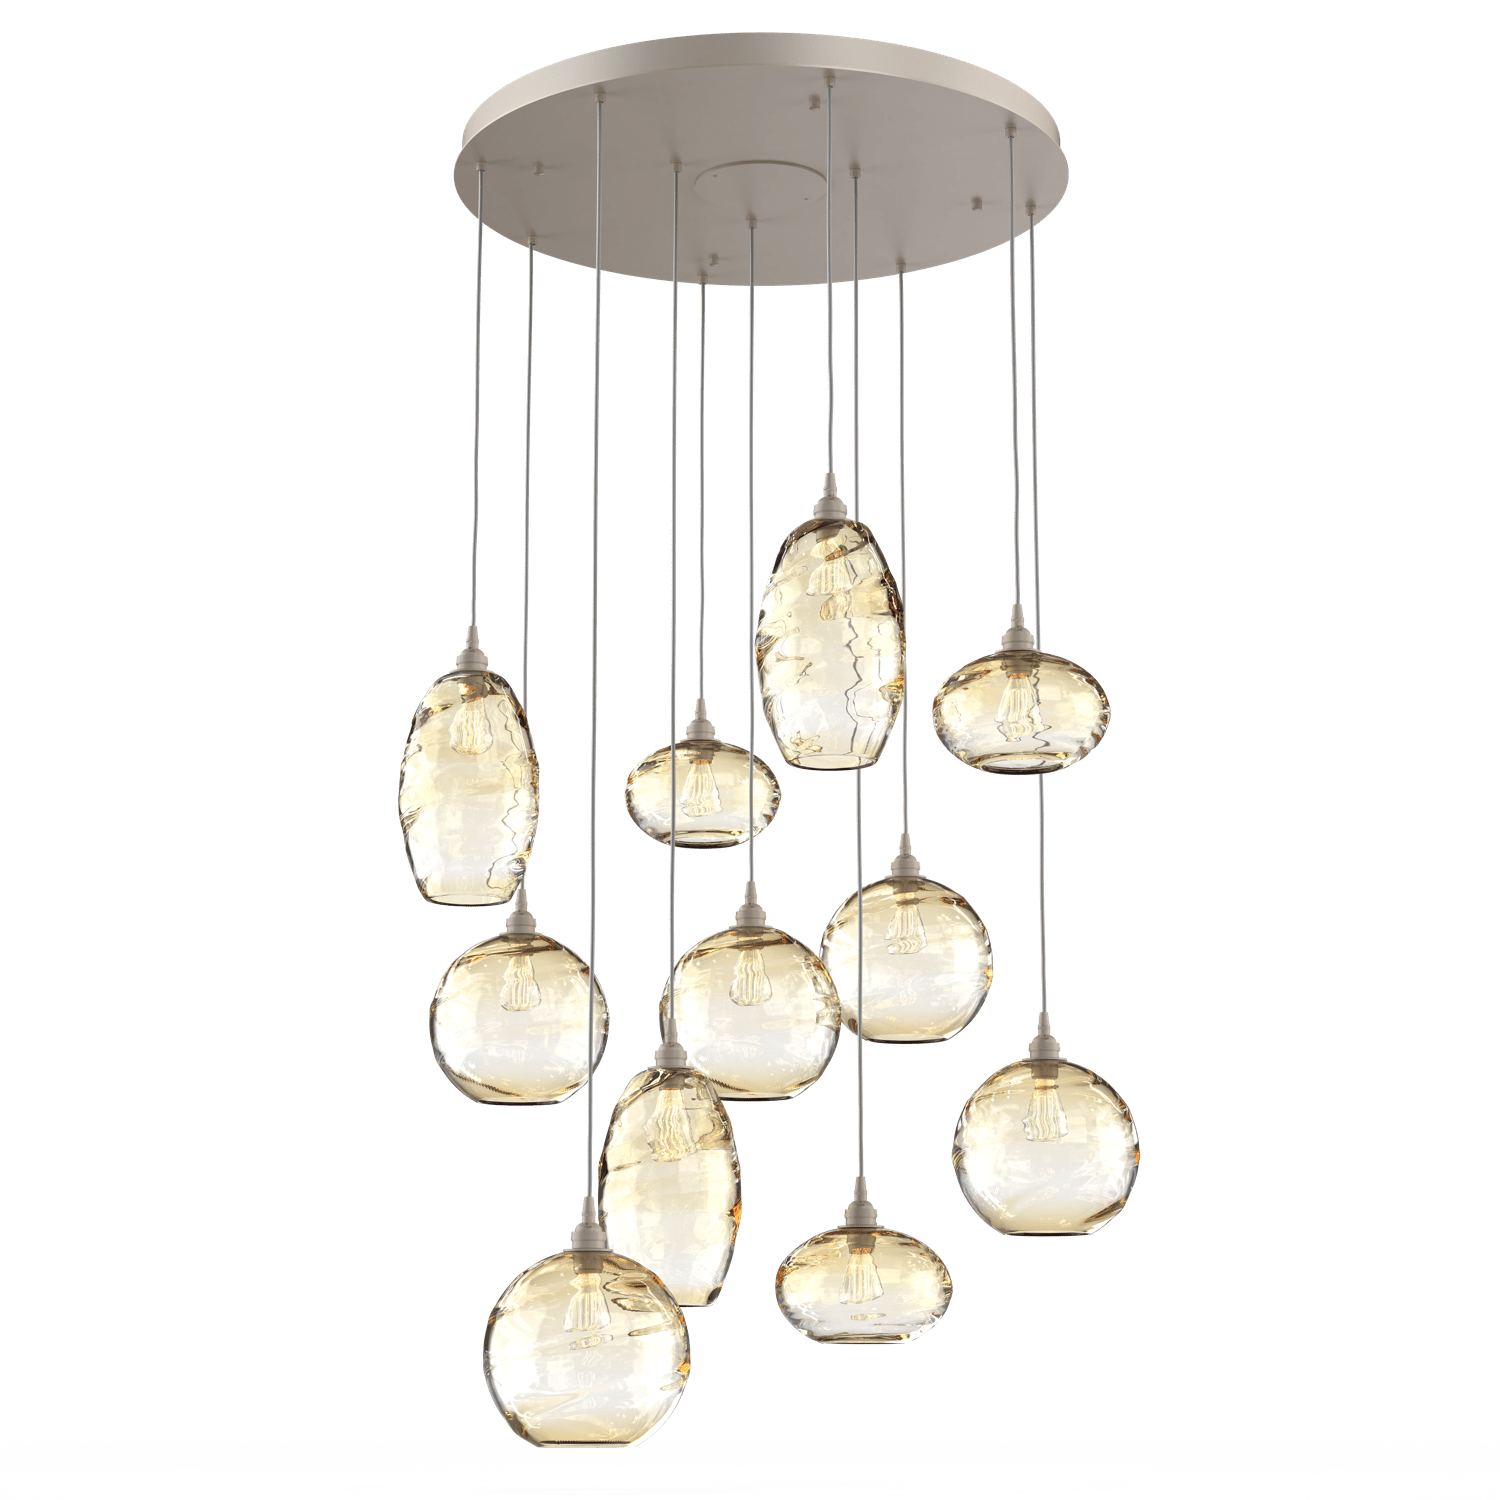 CHB0048-11-BS-OA-Hammerton-Studio-Optic-Blown-Glass-Misto-11-light-round-pendant-chandelier-with-metallic-beige-silver-finish-and-optic-amber-blown-glass-shades-and-incandescent-lamping